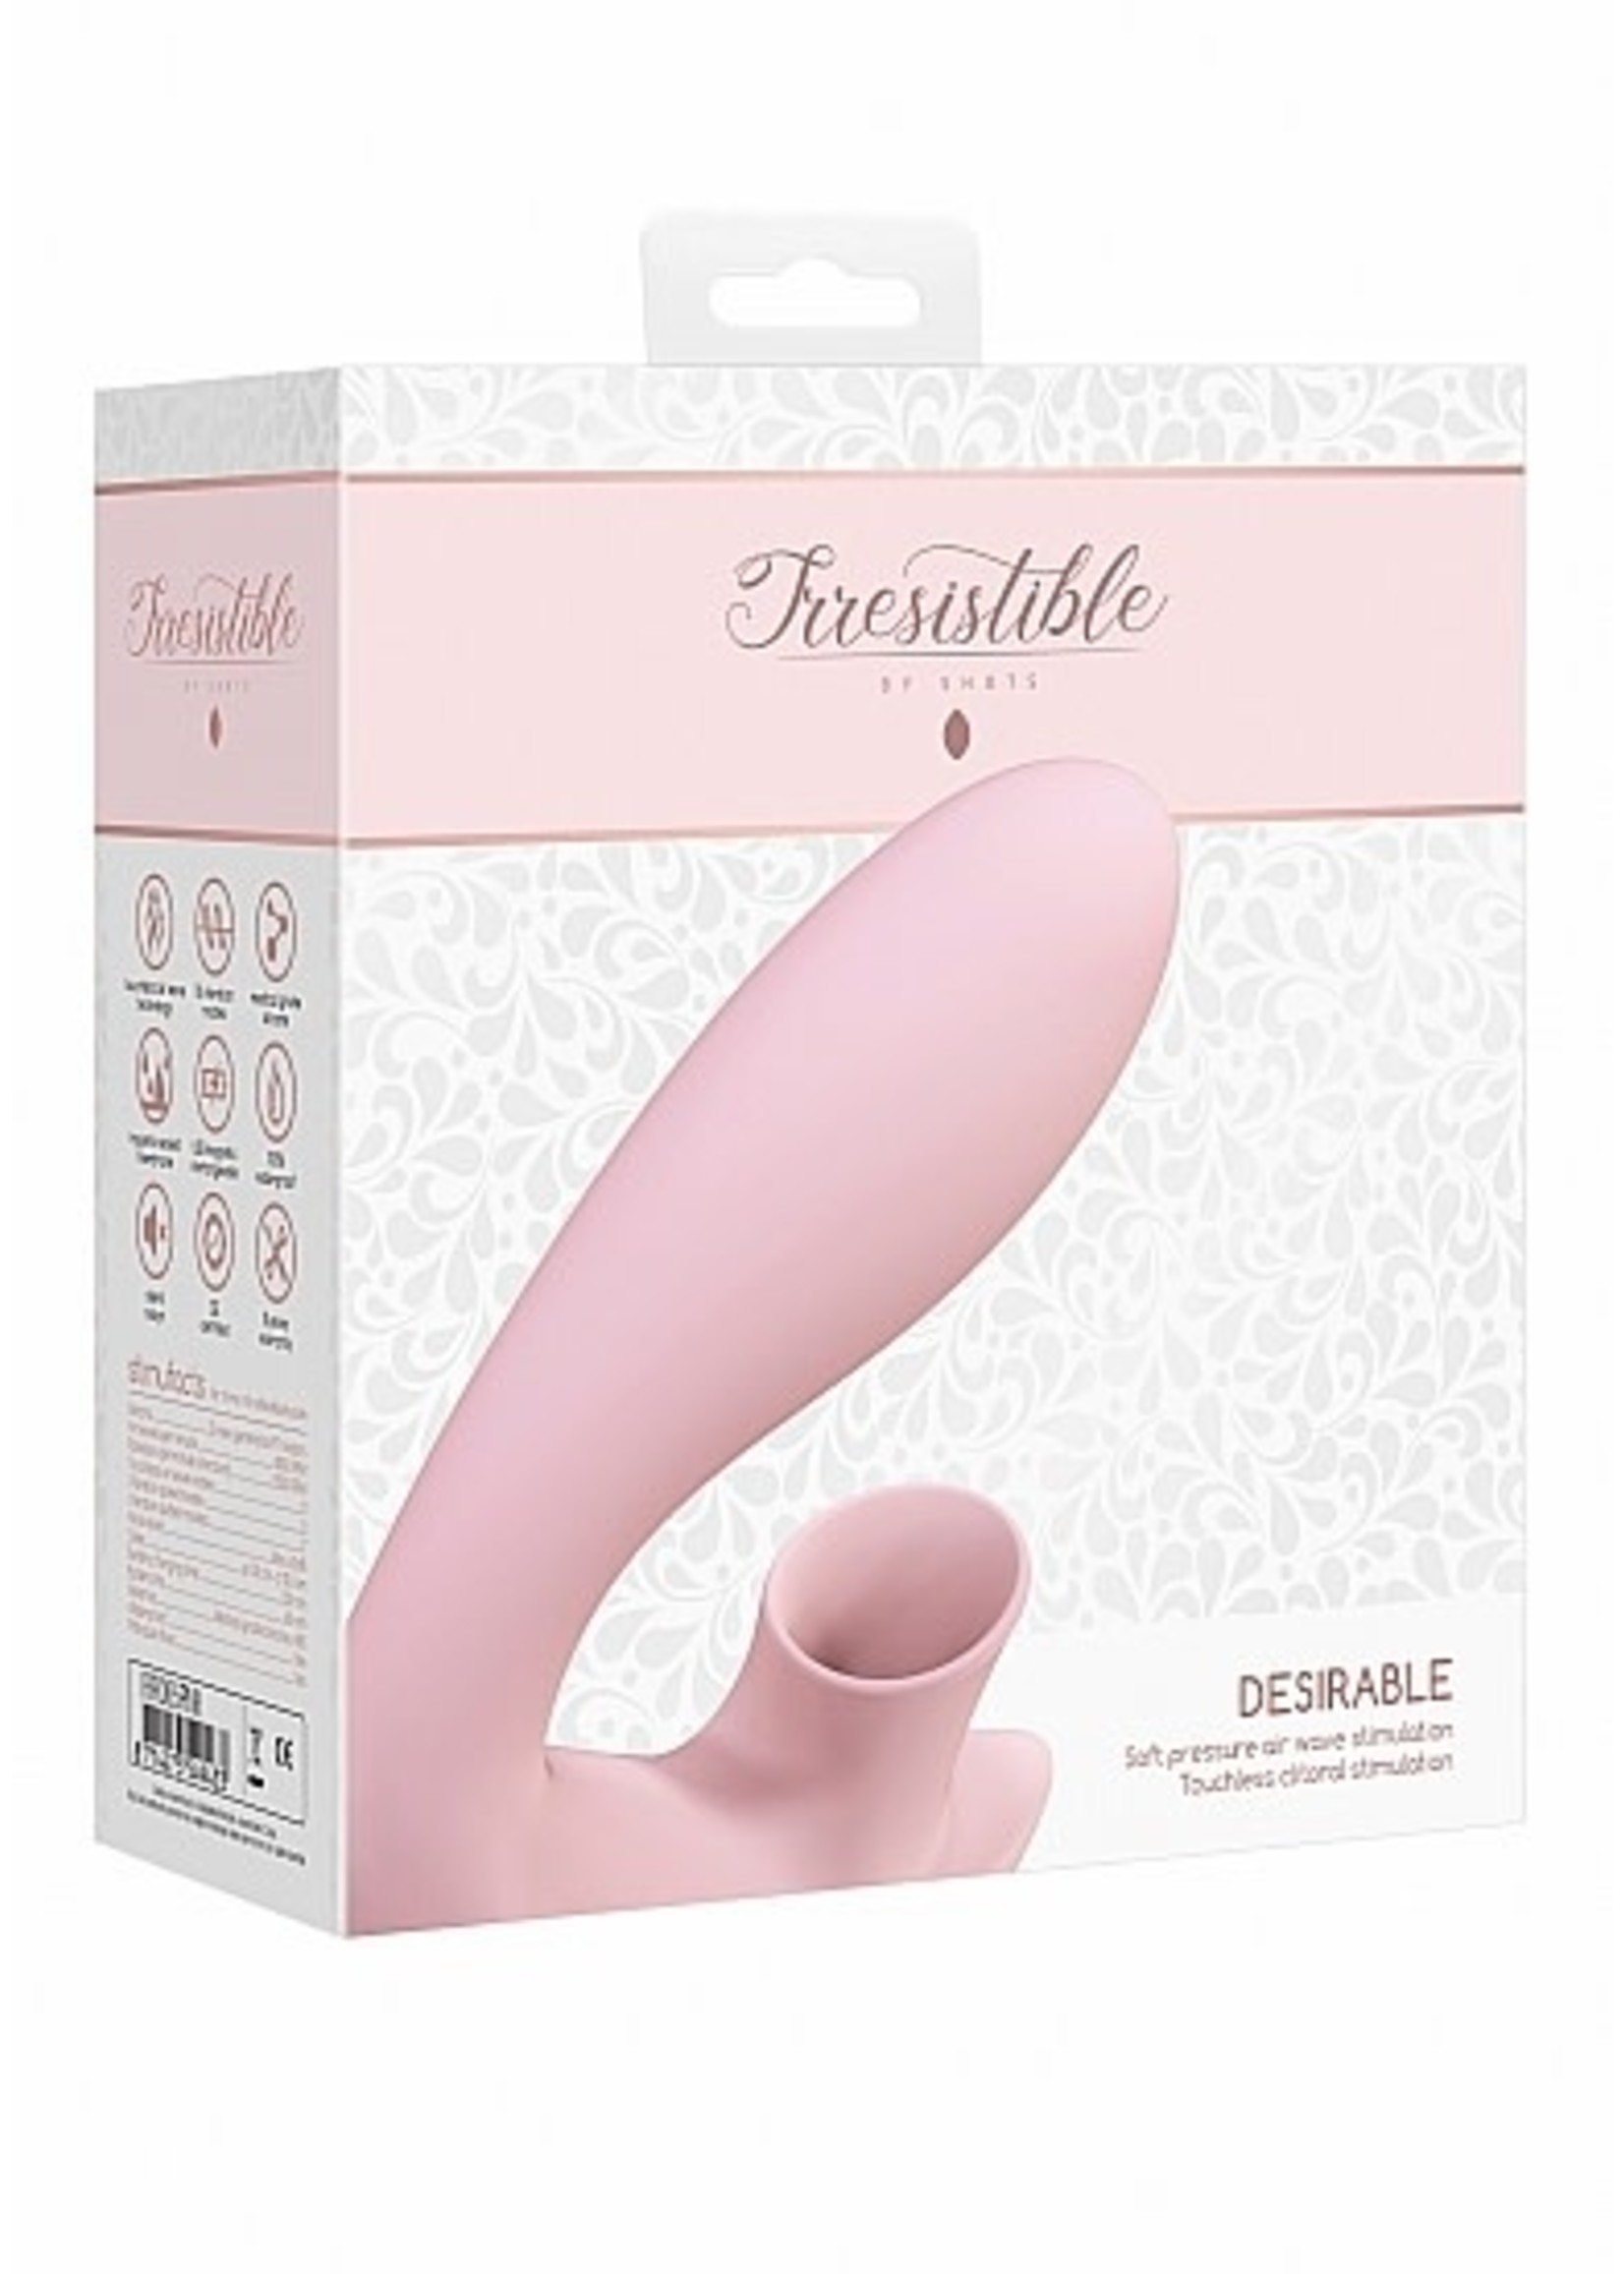 Irresistible by Shots Desirable - Pink